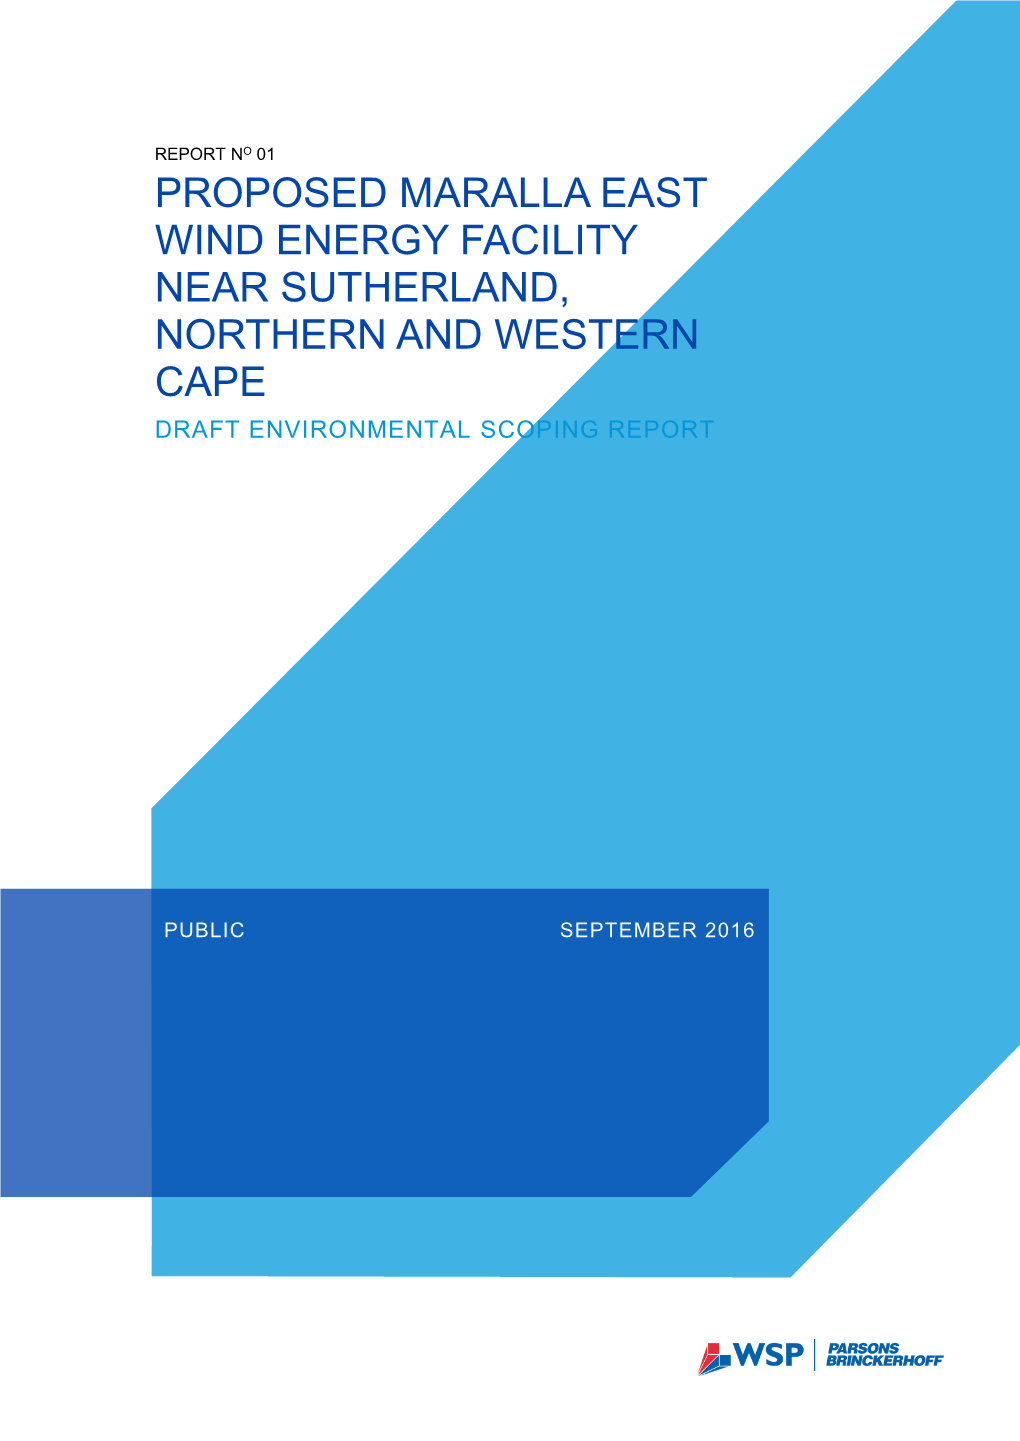 Proposed Maralla East Wind Energy Facility Near Sutherland, Northern and Western Cape Draft Environmental Scoping Report